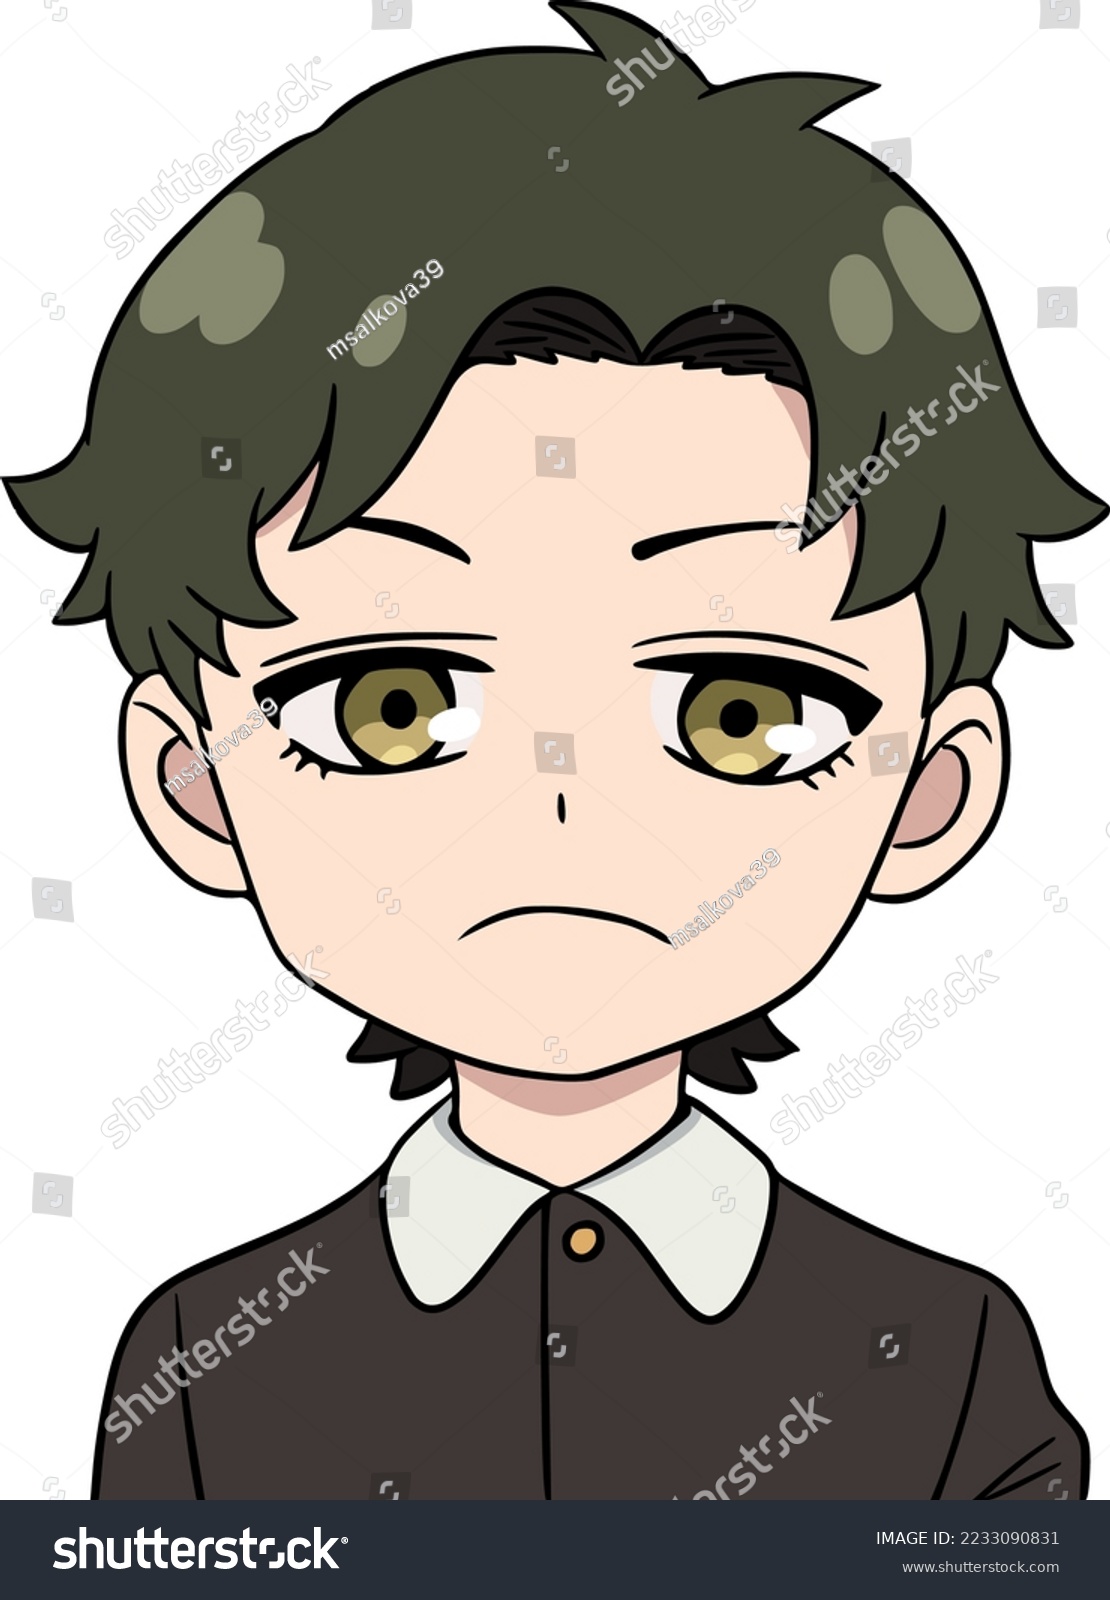 SVG of Boy with green hair and golden eyes, he looks straight ahead, frustrated, school black uniform with a white shirt svg